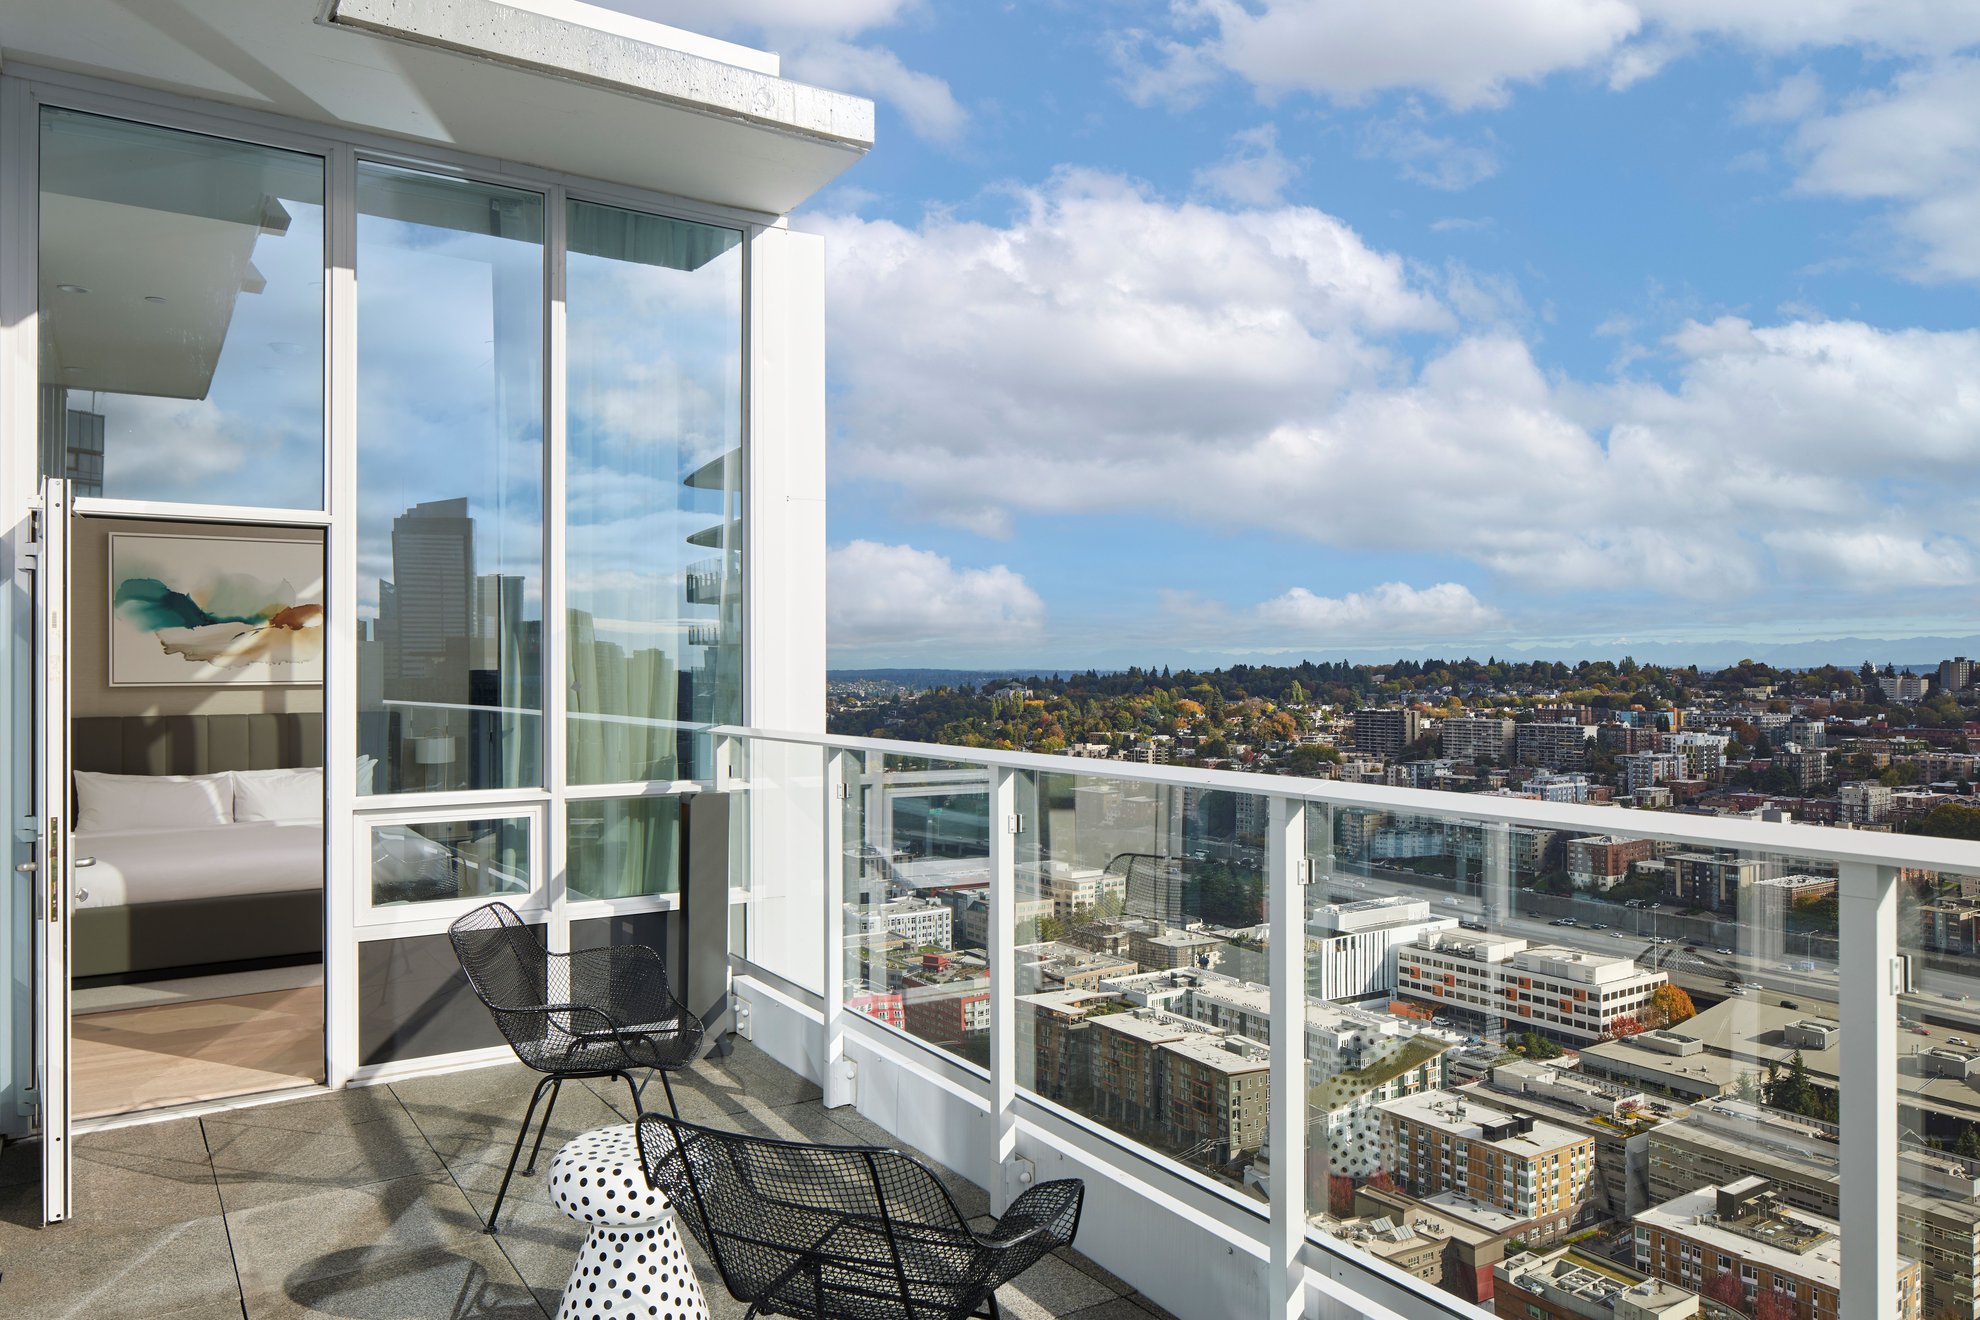 large outdoor balcony overlooking a city with outdoor furnitues at the penthouse level seattle south lake union.jpg